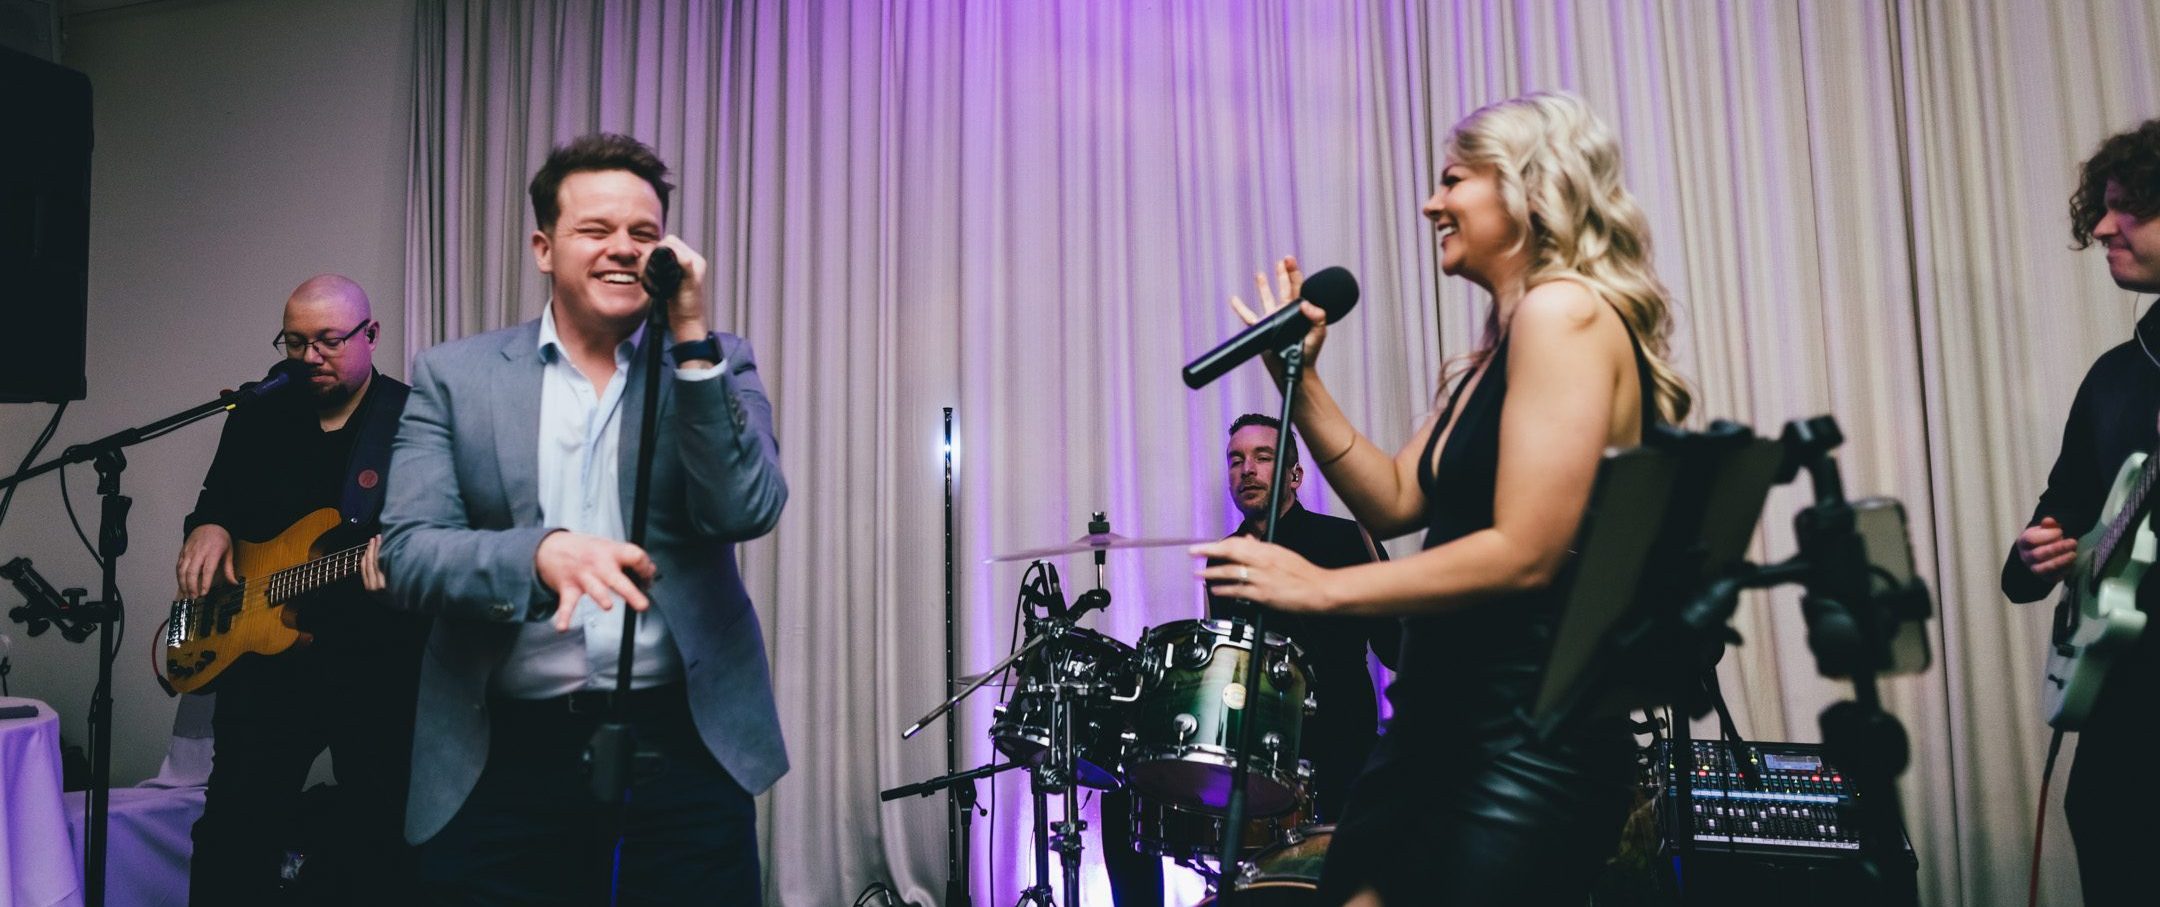 a music band, entertaining the guests of a wedding. Captured by Widfotografia, Melbourne wedding photographer